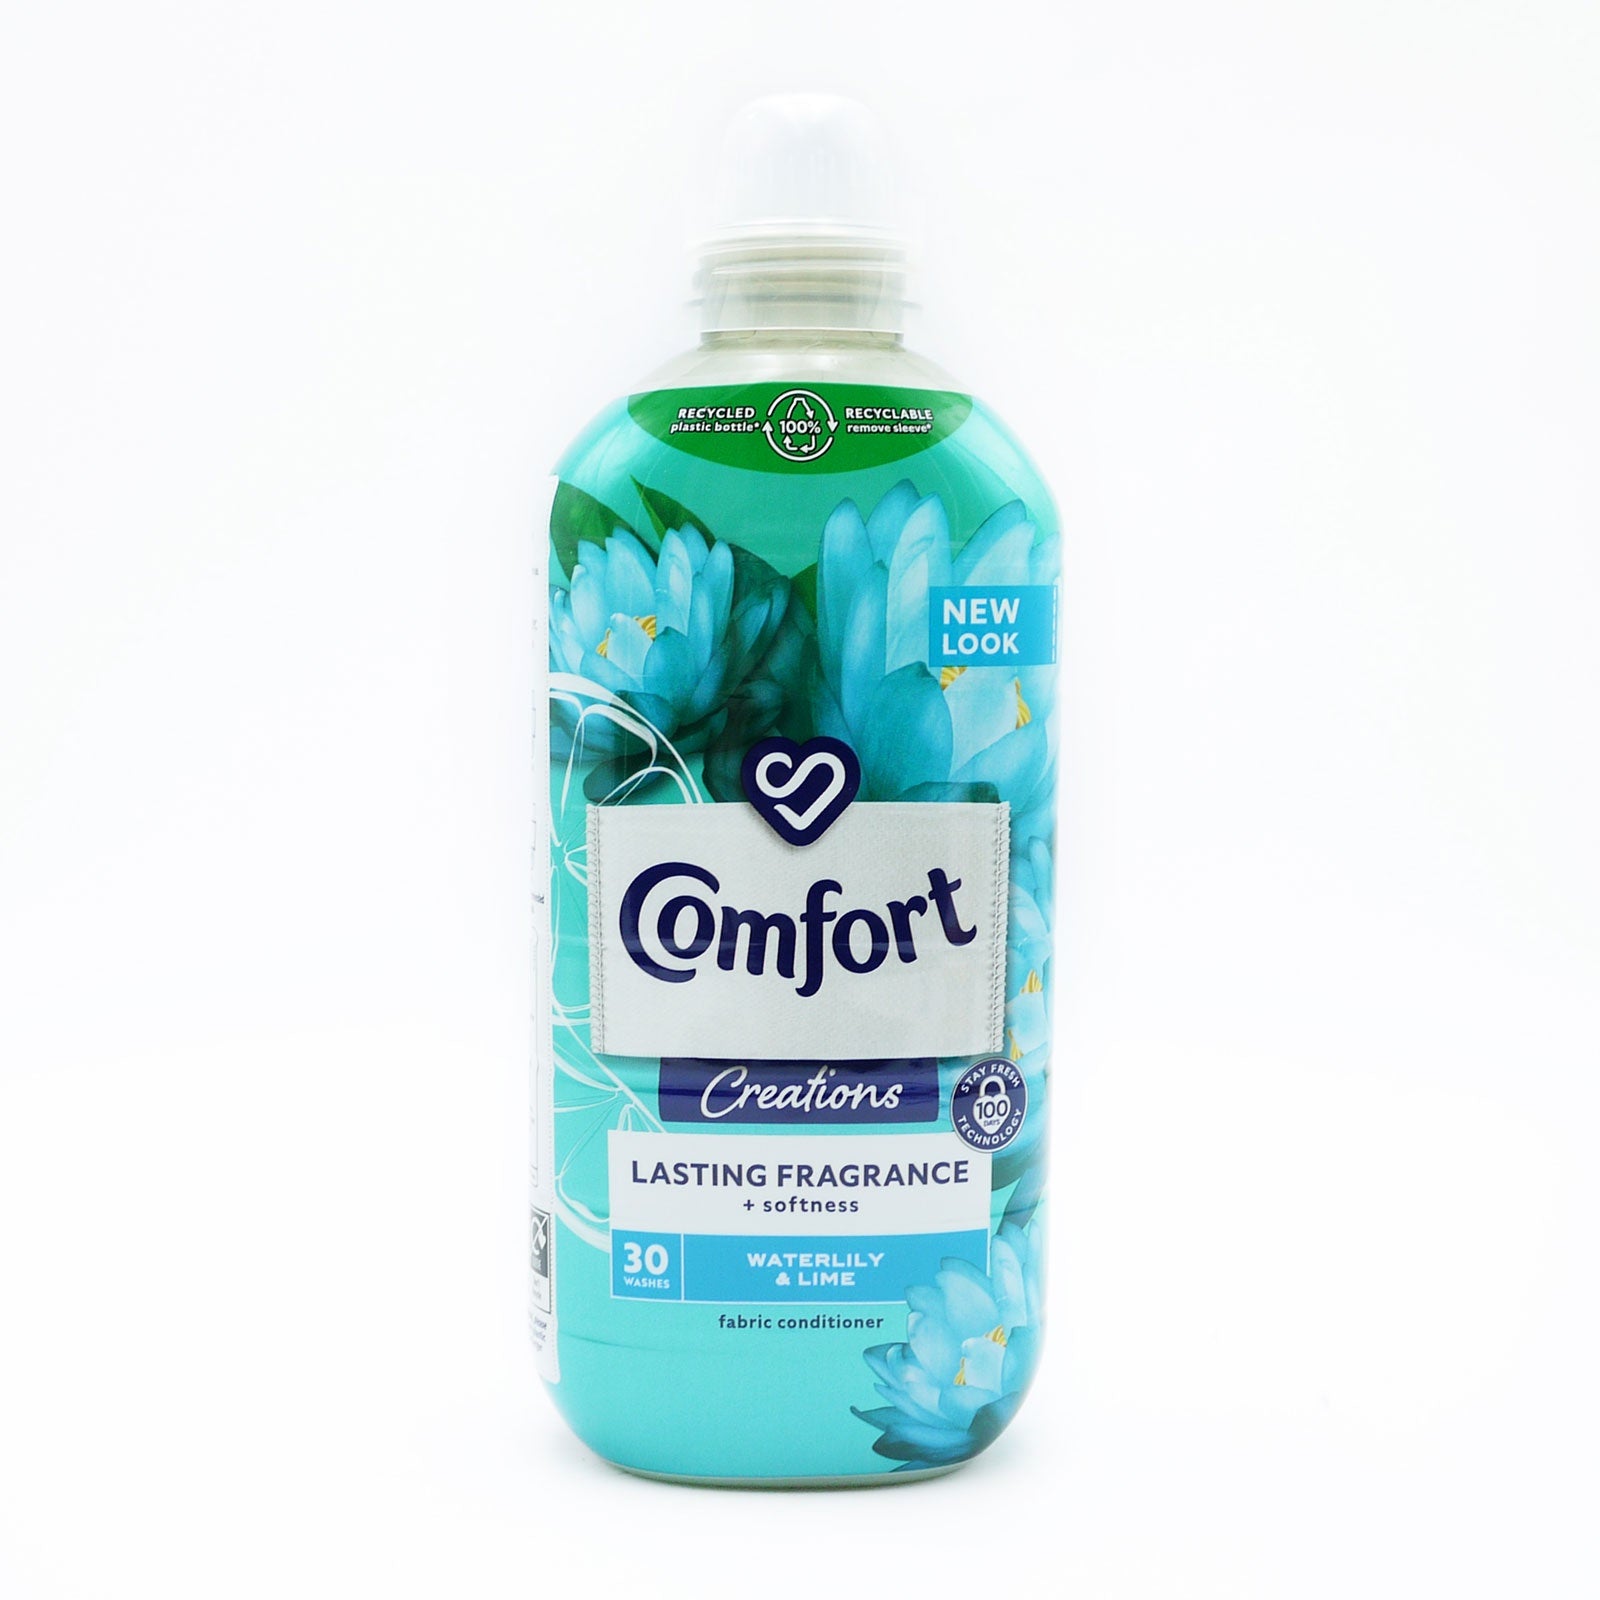 Comfort  Creations Fabric Conditioner Waterlily 30w*